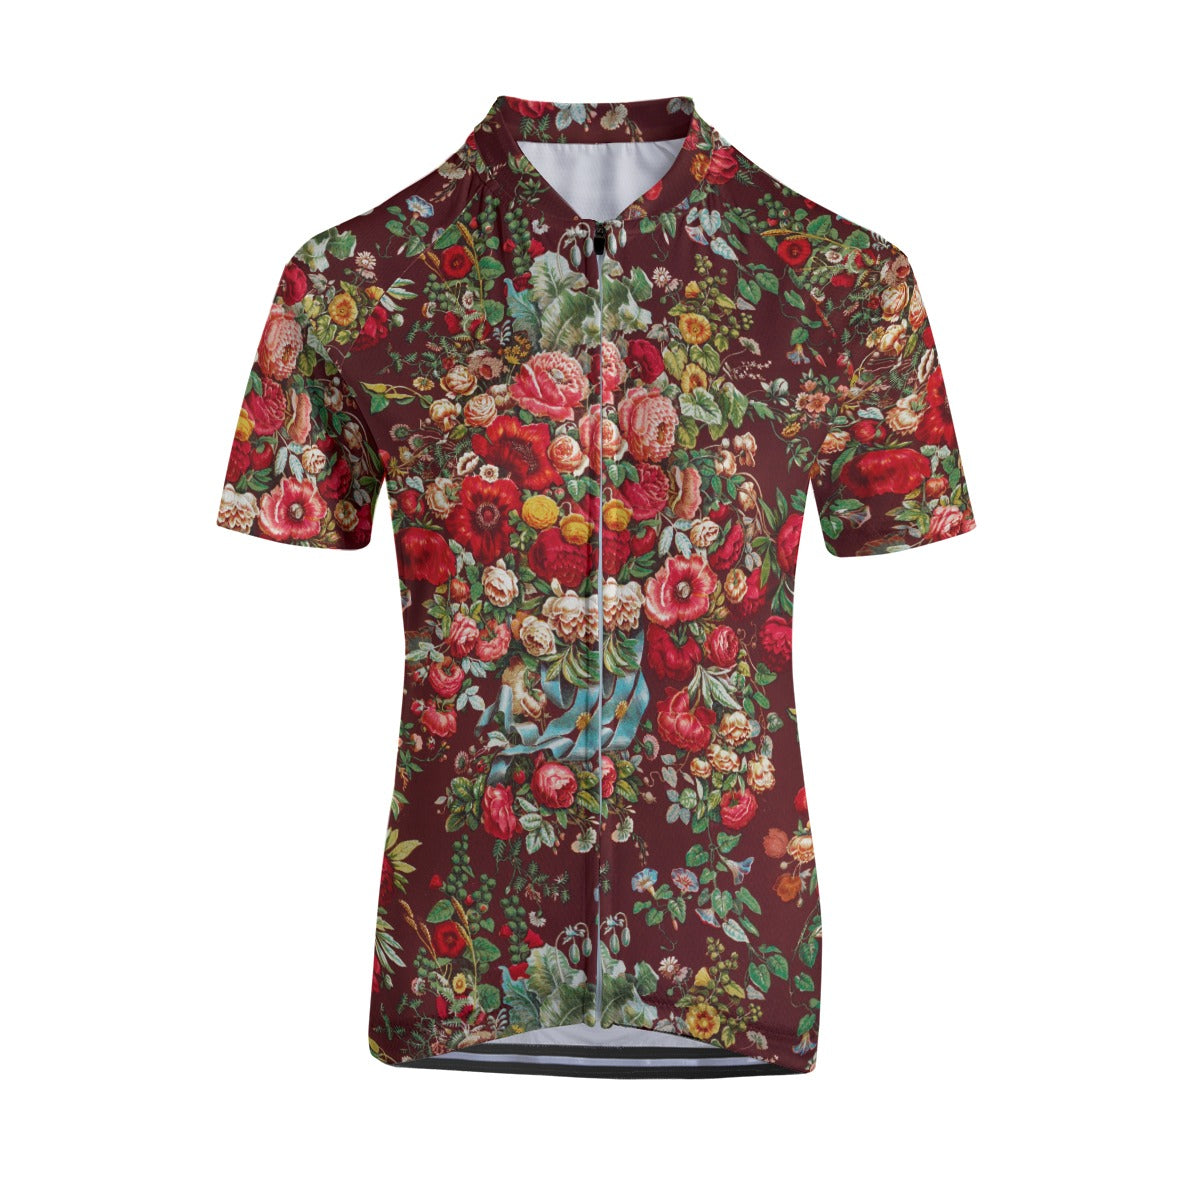 Enchanted Floral Symphony - Women's Cycling Jersey